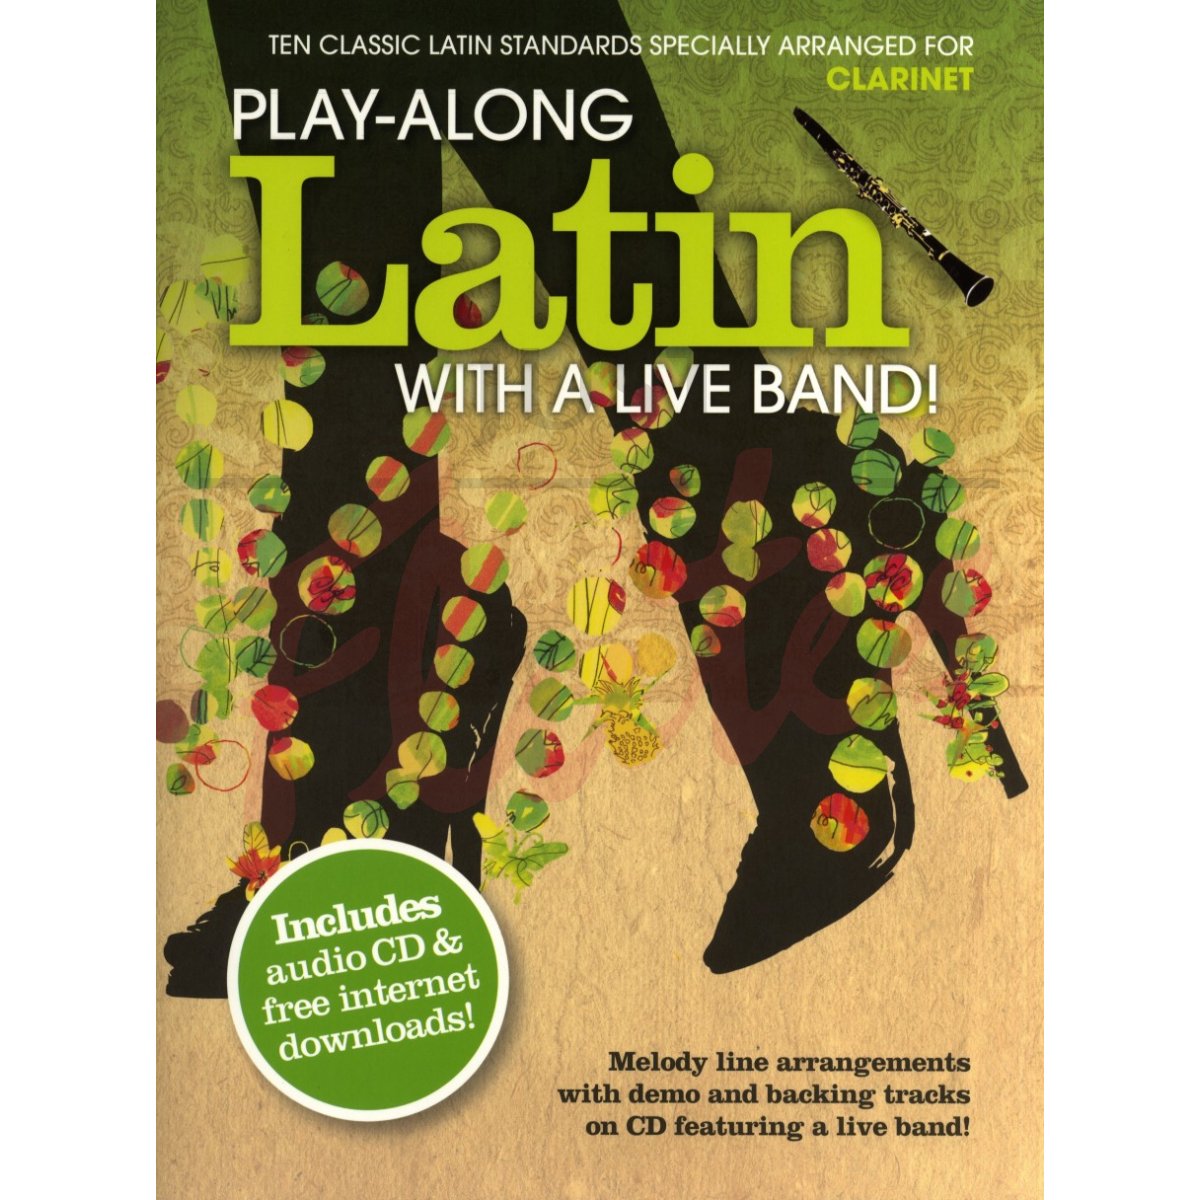 Play-Along Latin With A Live Band! [Clarinet]